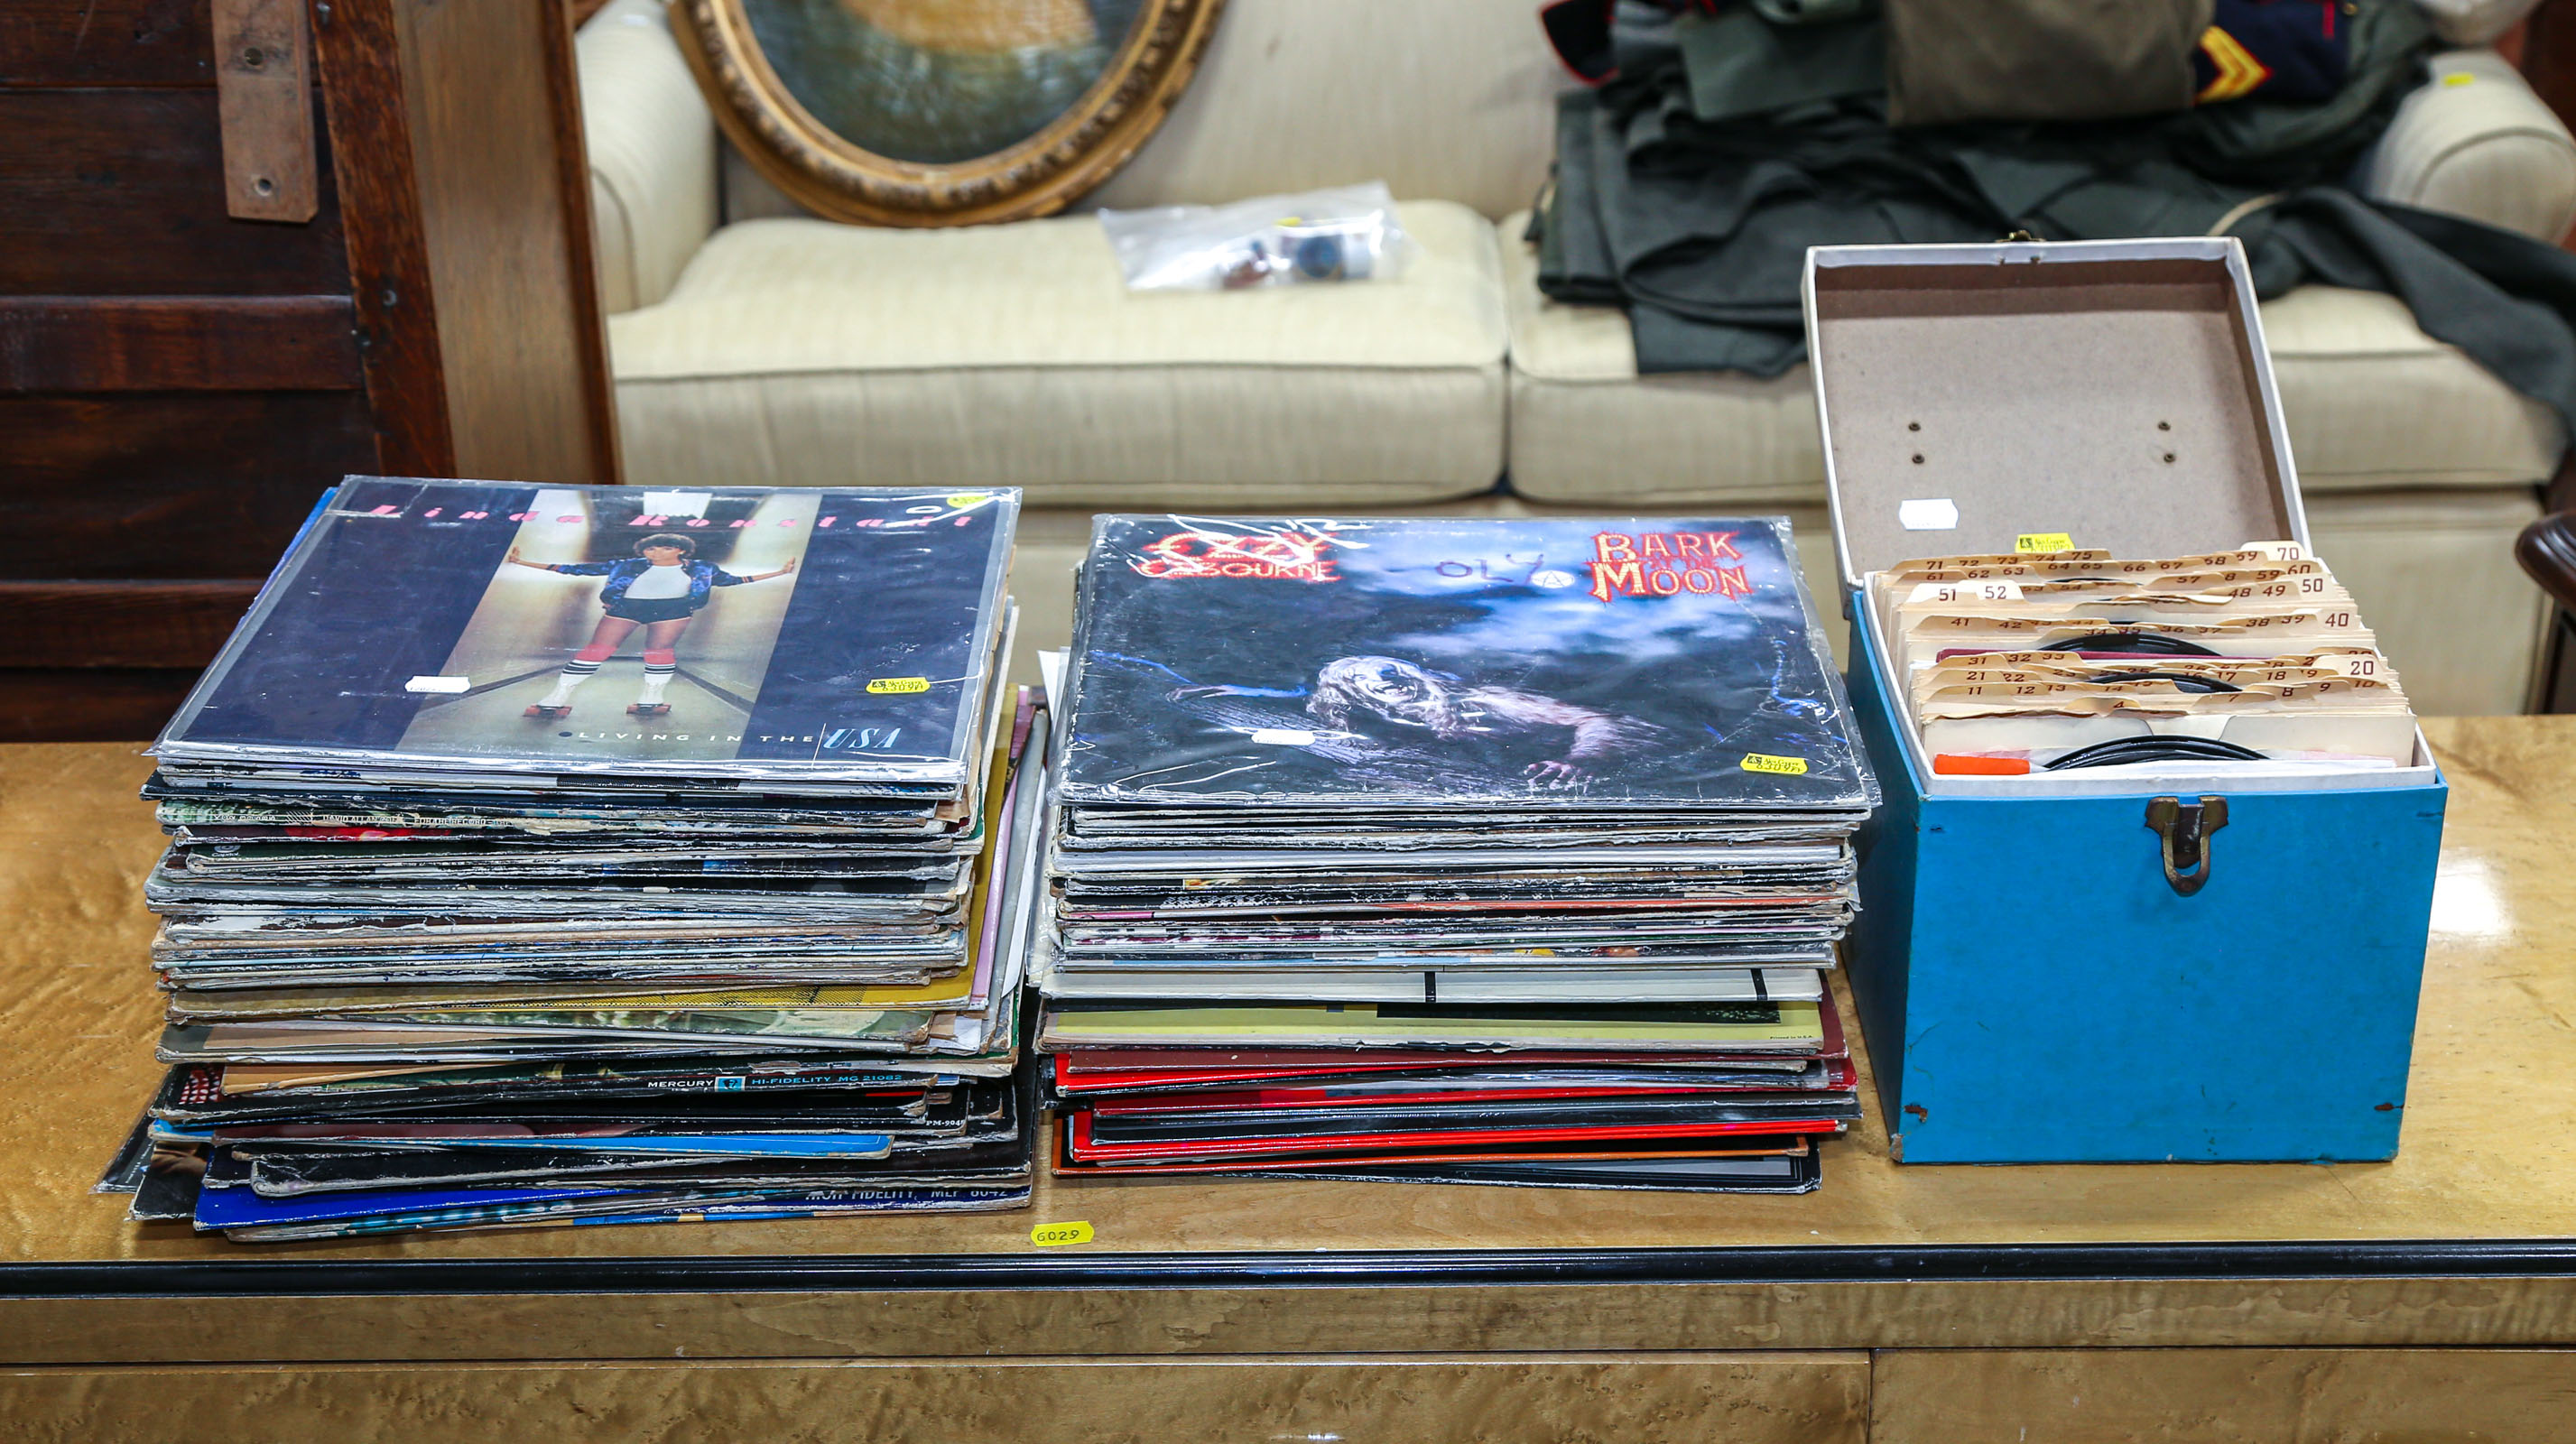 LARGE GROUP OF LP ALBUMS 45S 2e92f6